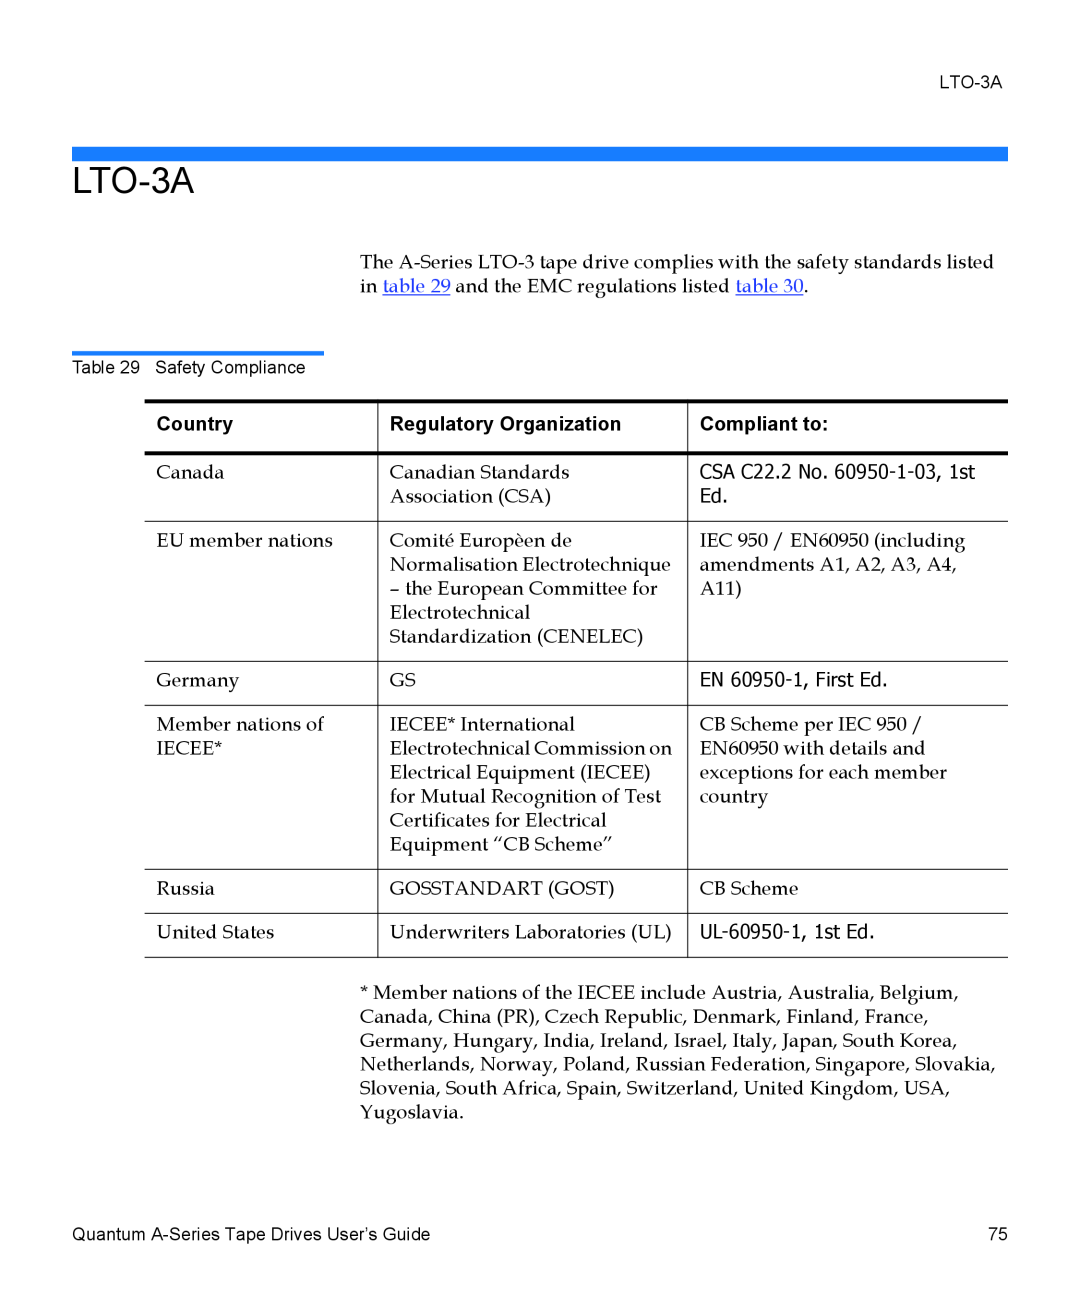 Quantum A-Series manual LTO-3A, Country, Regulatory Organization, Compliant to 